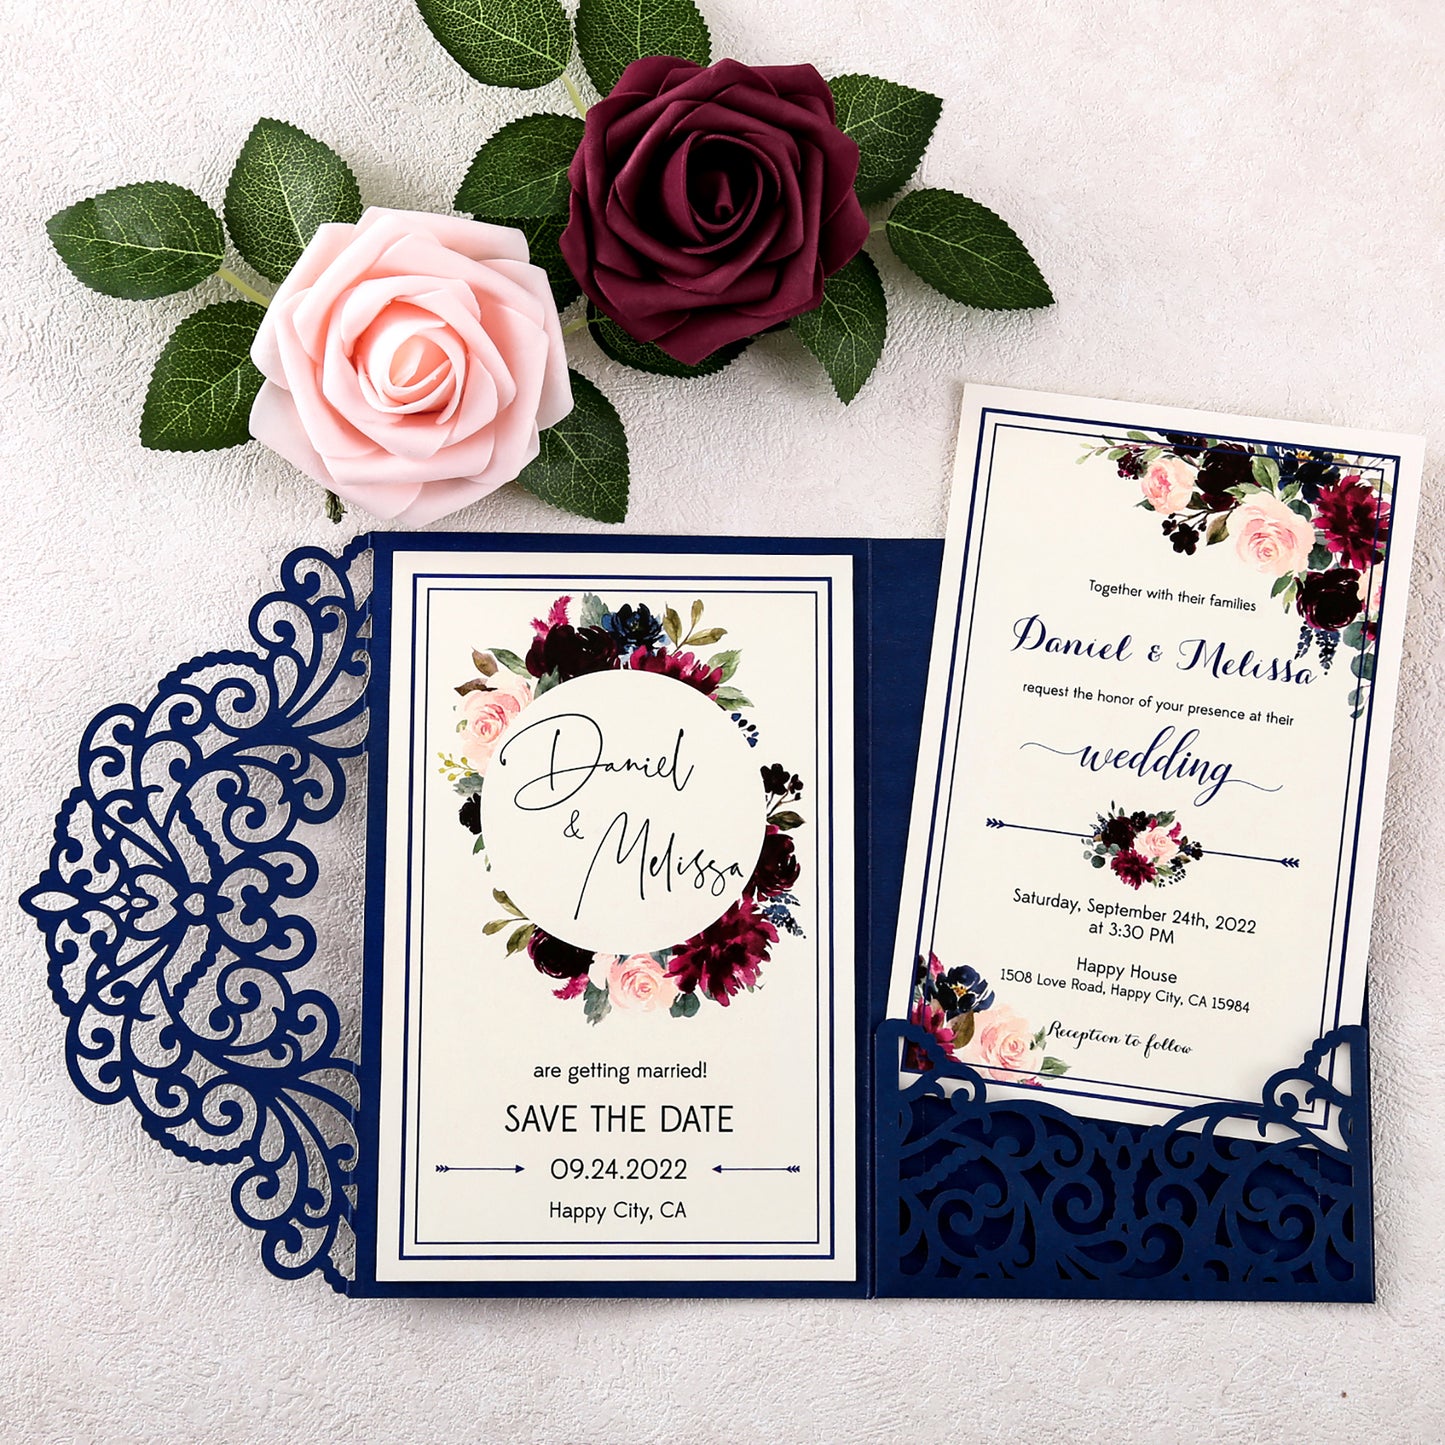 4.7 x7 inch Navy Blue Laser Cut Wedding Invitations With Envelopes Kit Hollow Rose Pocket And Gold Glitter Belly Band for Wedding Bridal Shower Engagement Invite